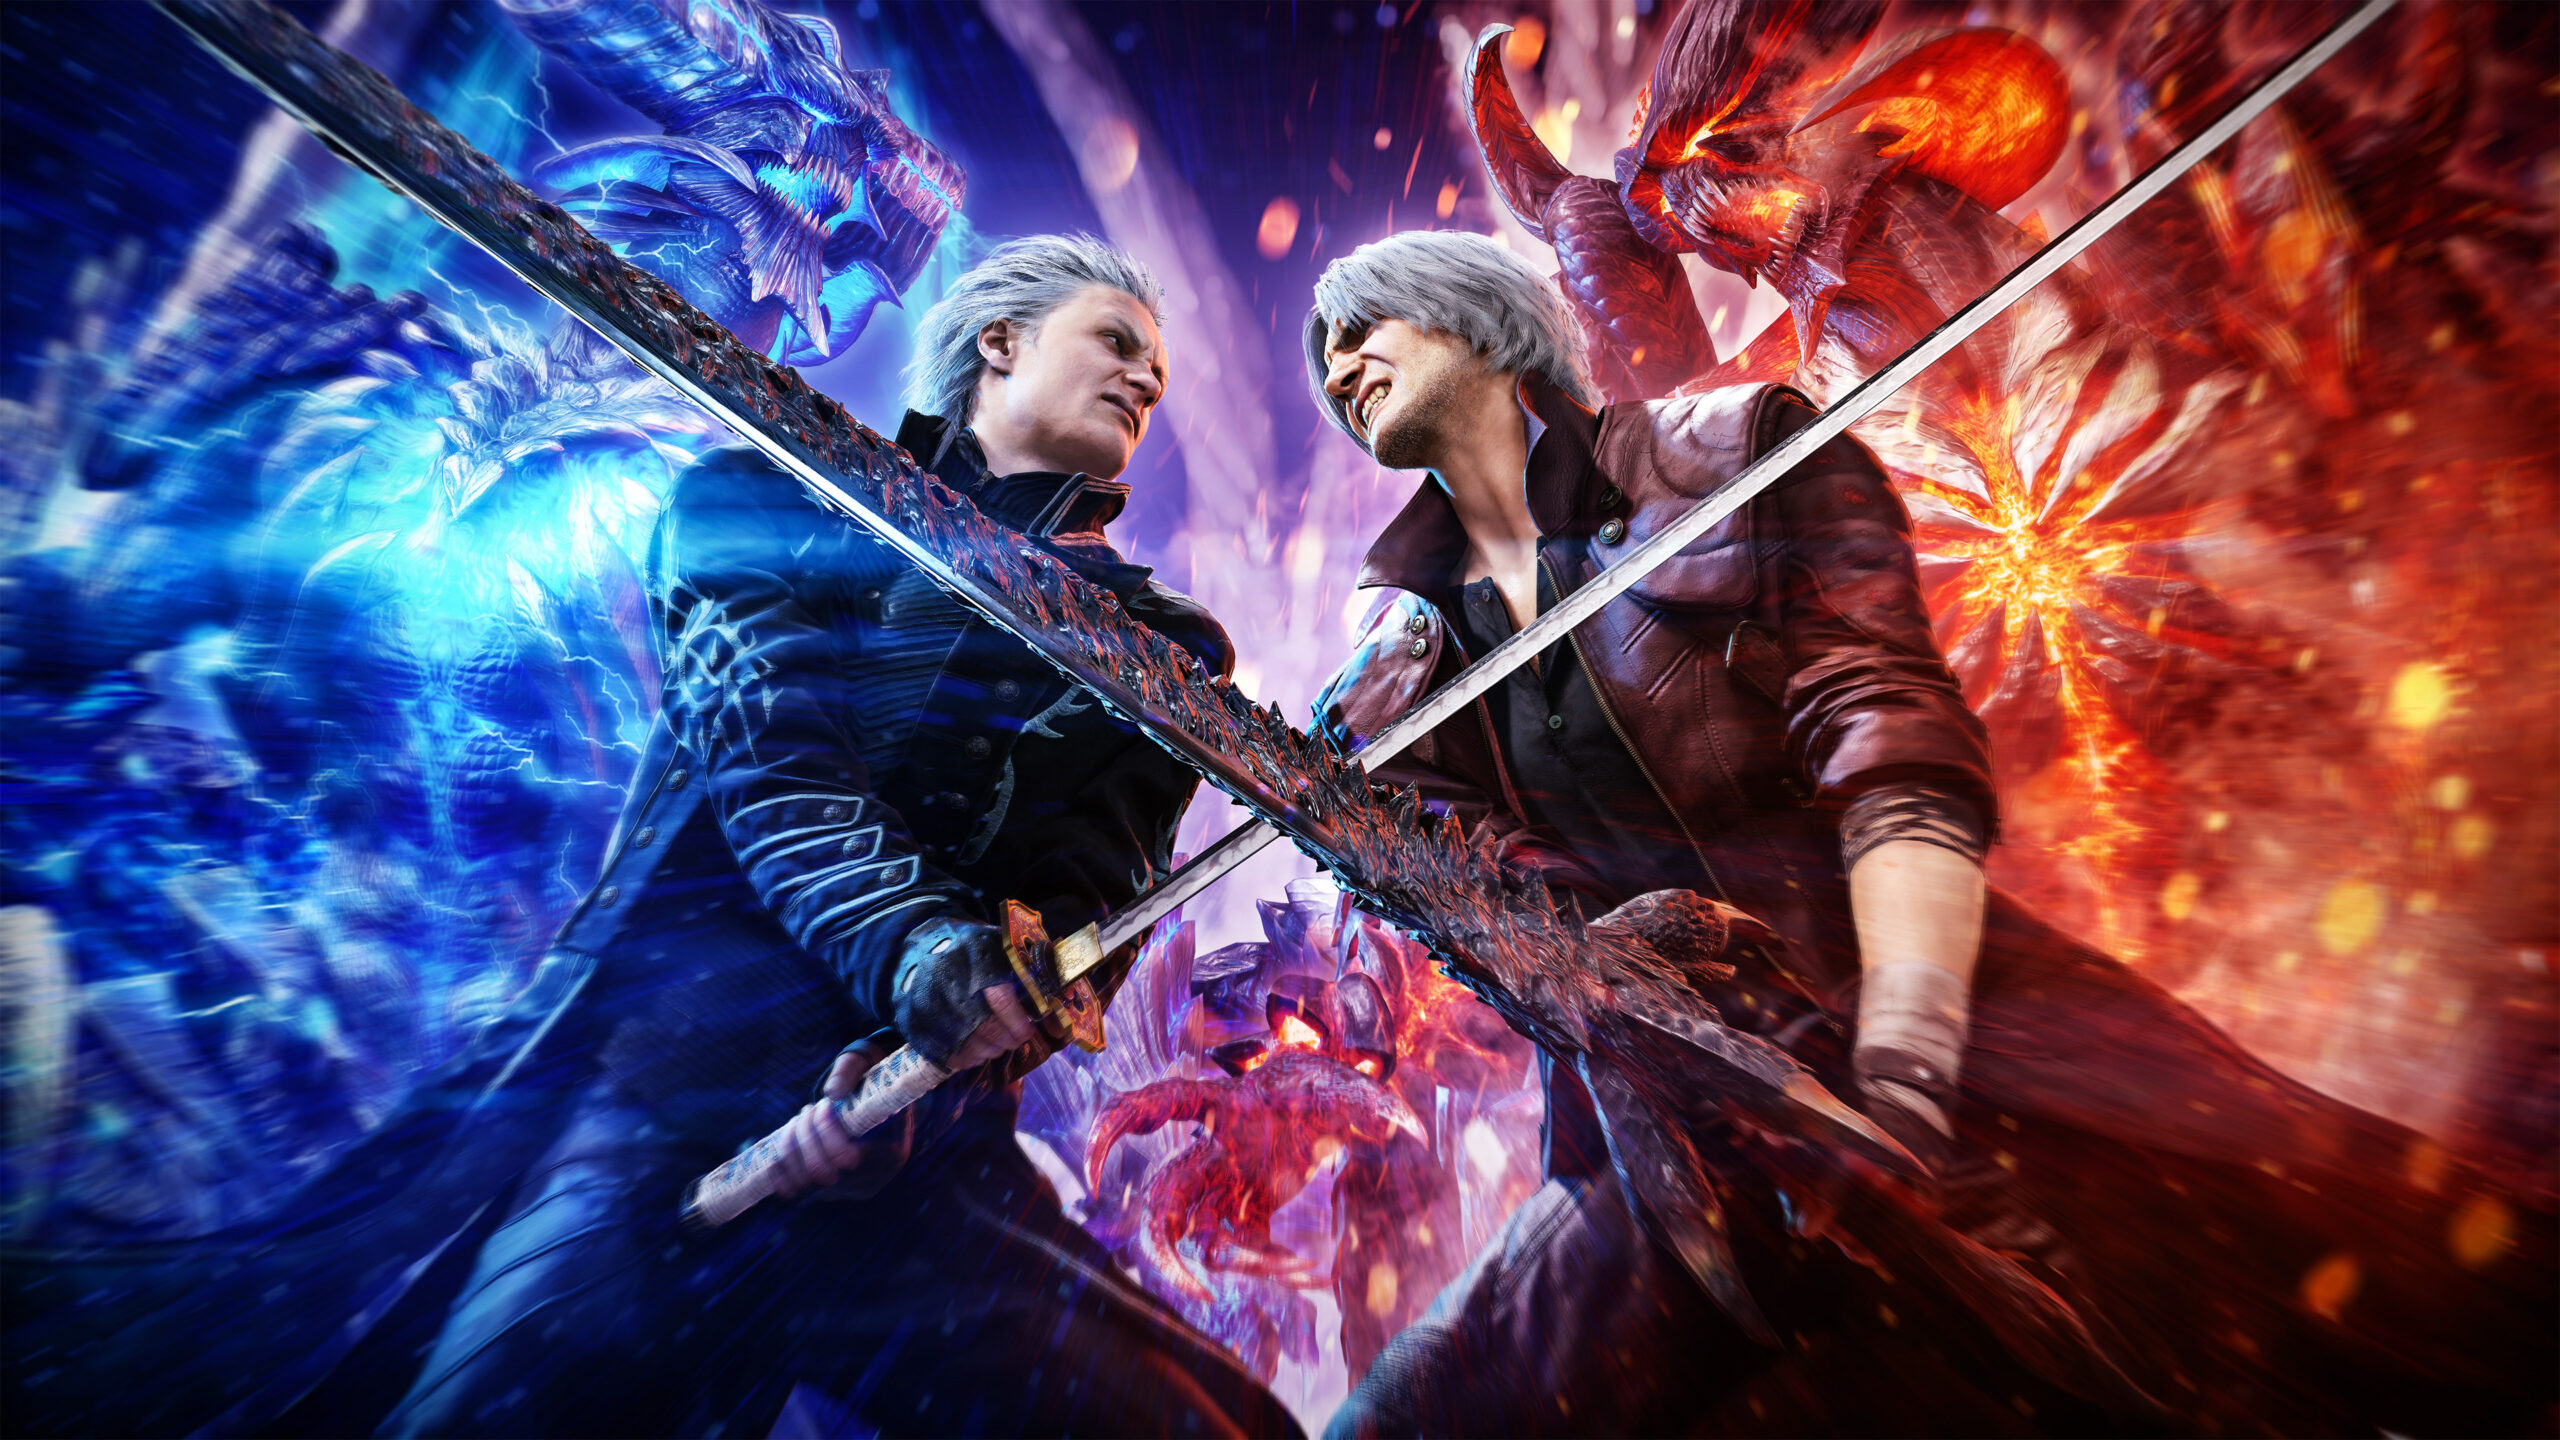 Devil May Cry 5 Releases Vergil As A Playable Character